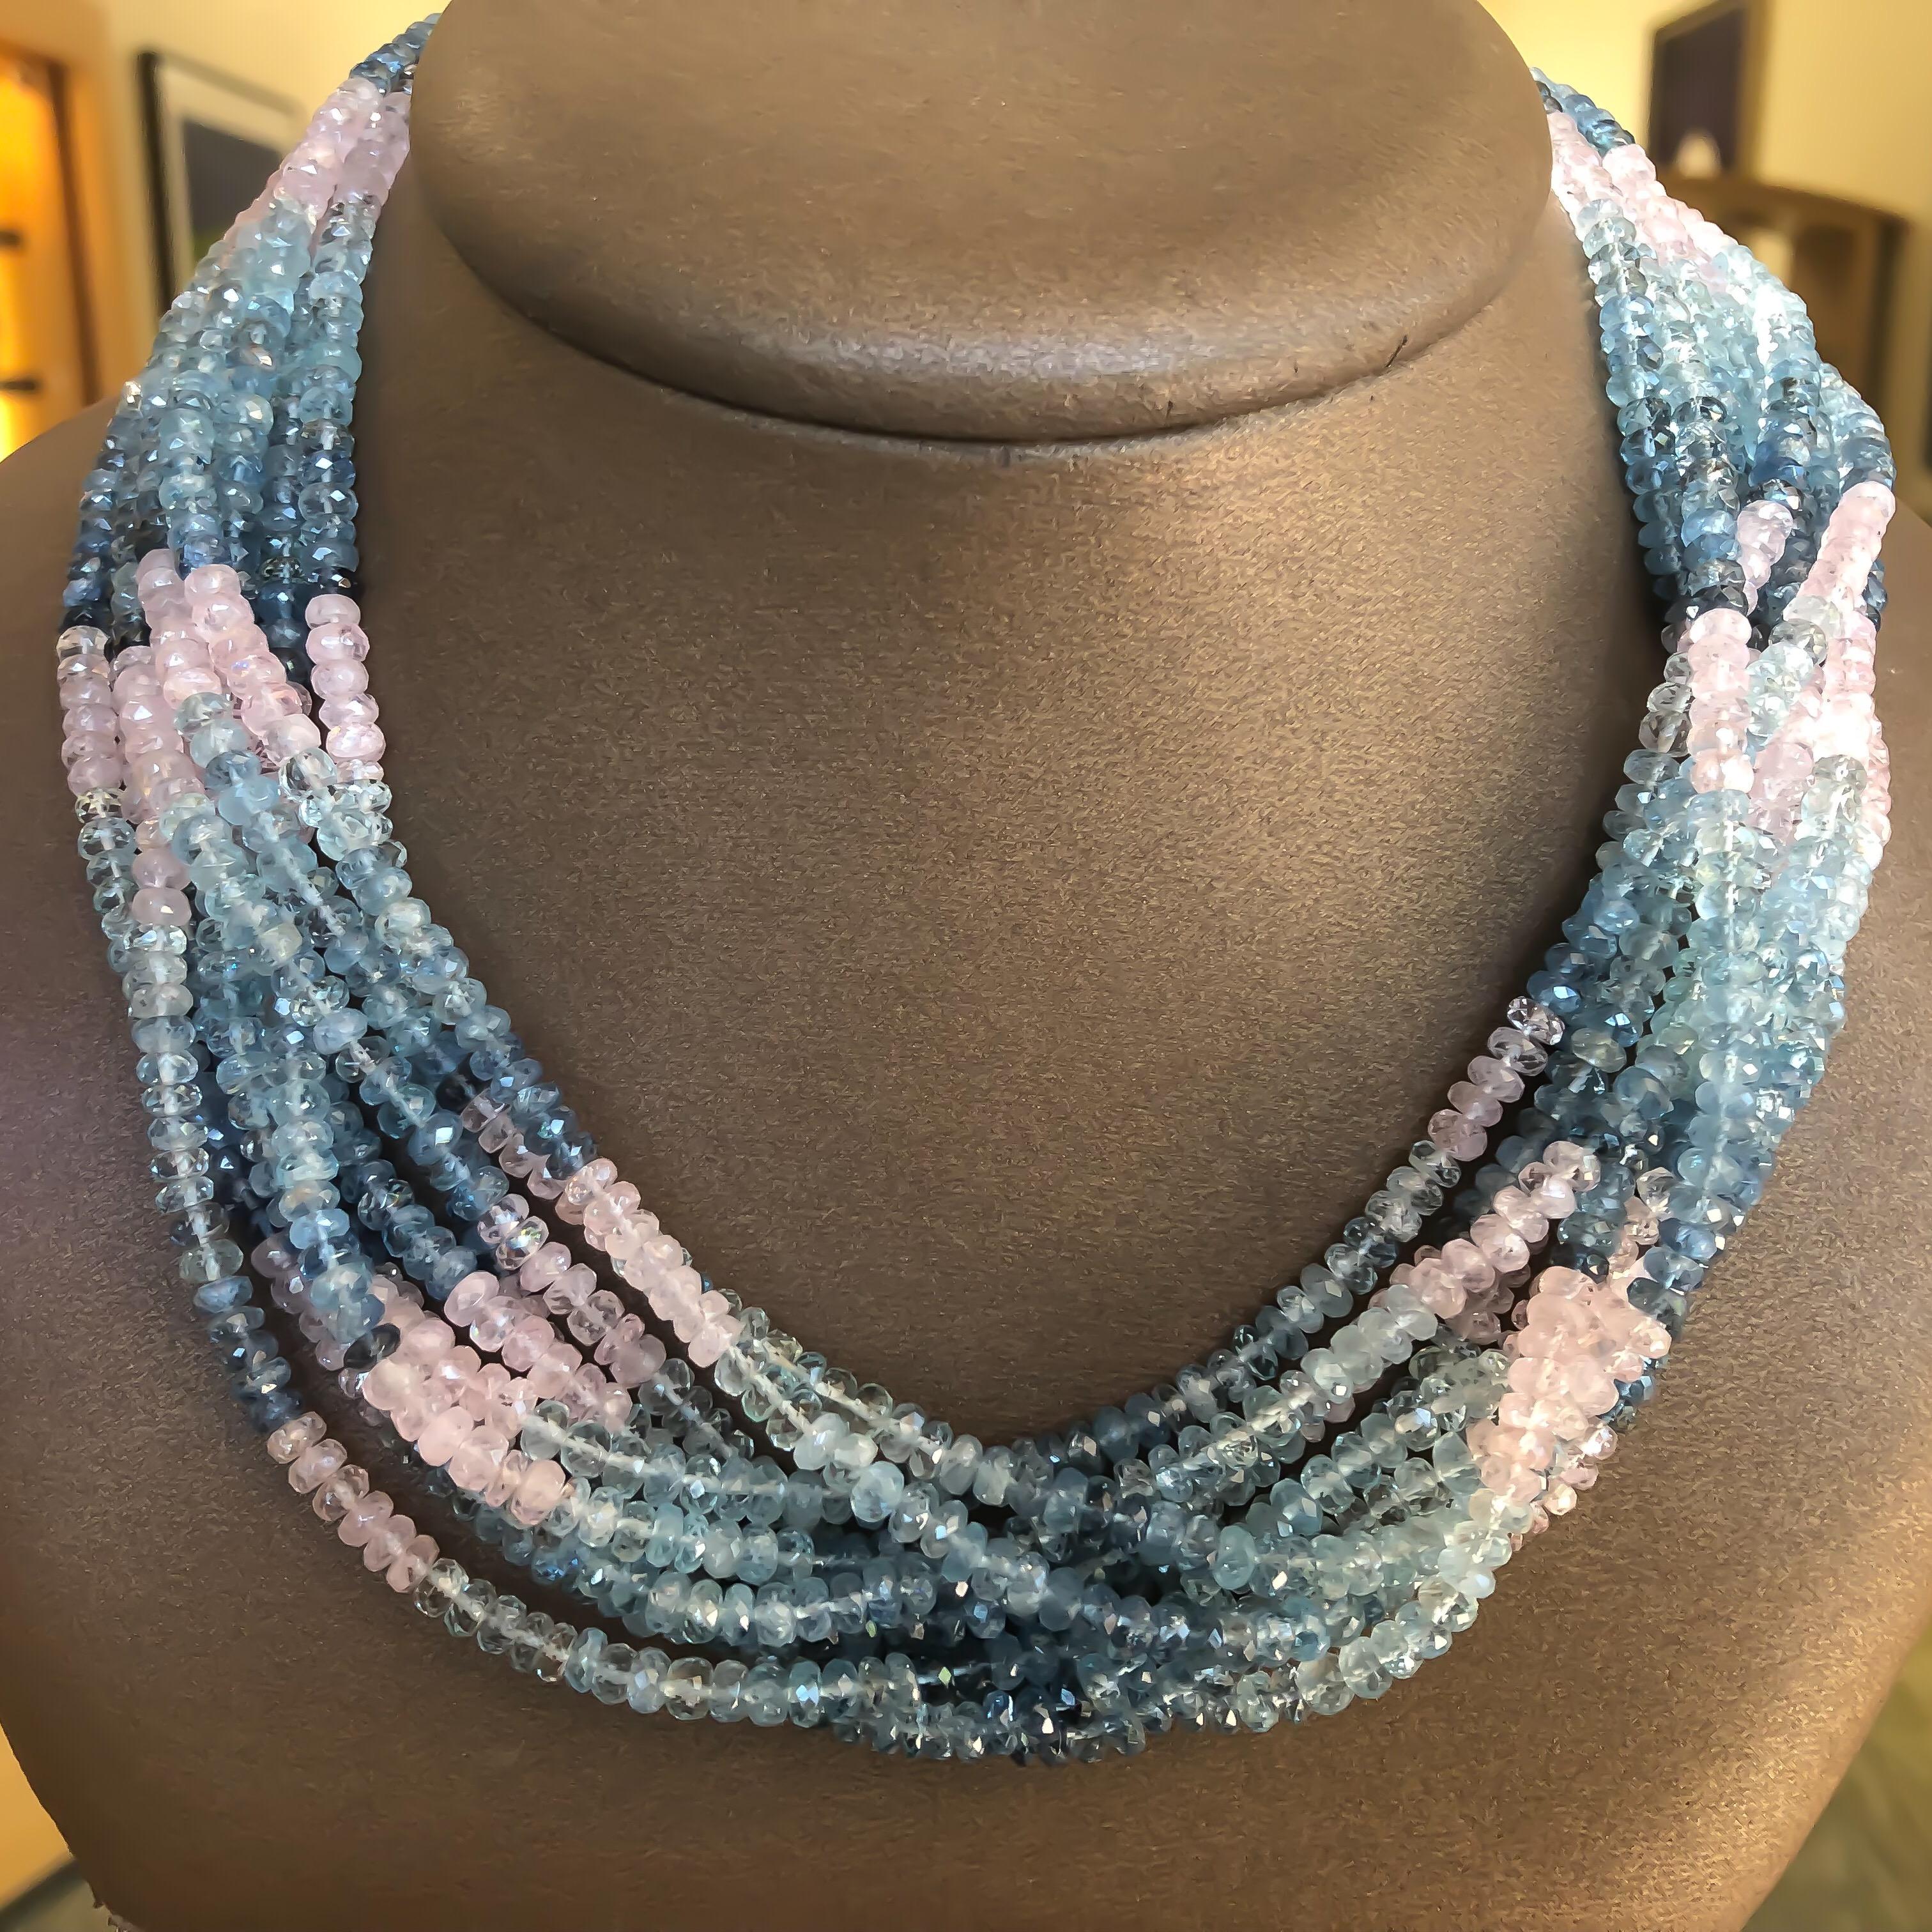 Custom designed natural aquamarine (blue) and morganite (pink) beryl fashion necklace designed with a 18 karat yellow gold clasp. There are ten (10) strands of ombre graduated color beads attached to a toggle clasp. This piece looks lovely on any